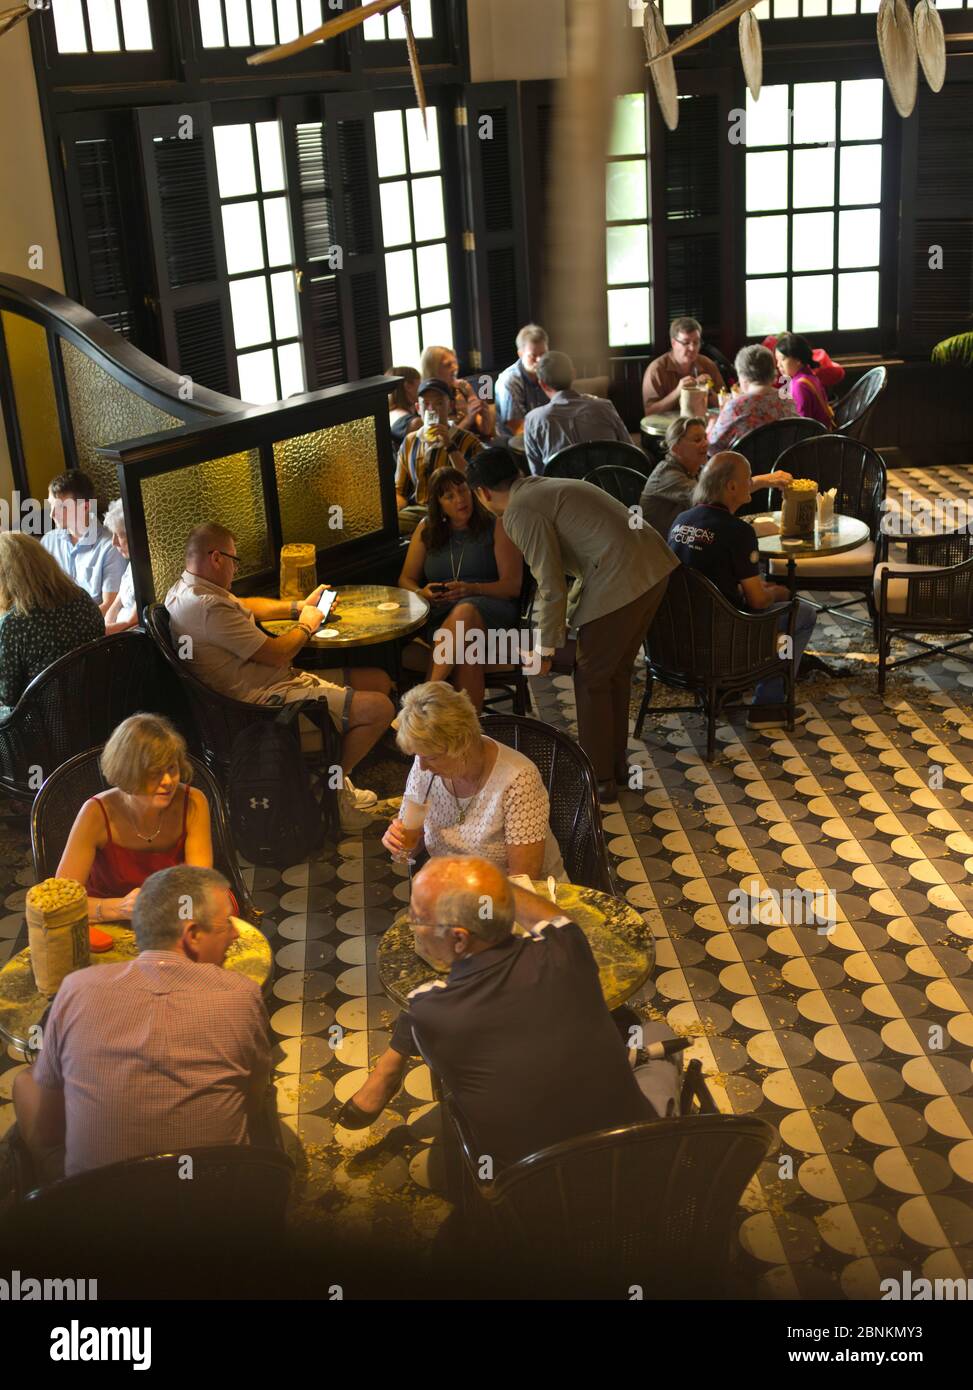 dh Long bar RAFFLES HOTEL SINGAPORE Tourist People relax with drinks at Tables hotels Colonial pub Foto Stock